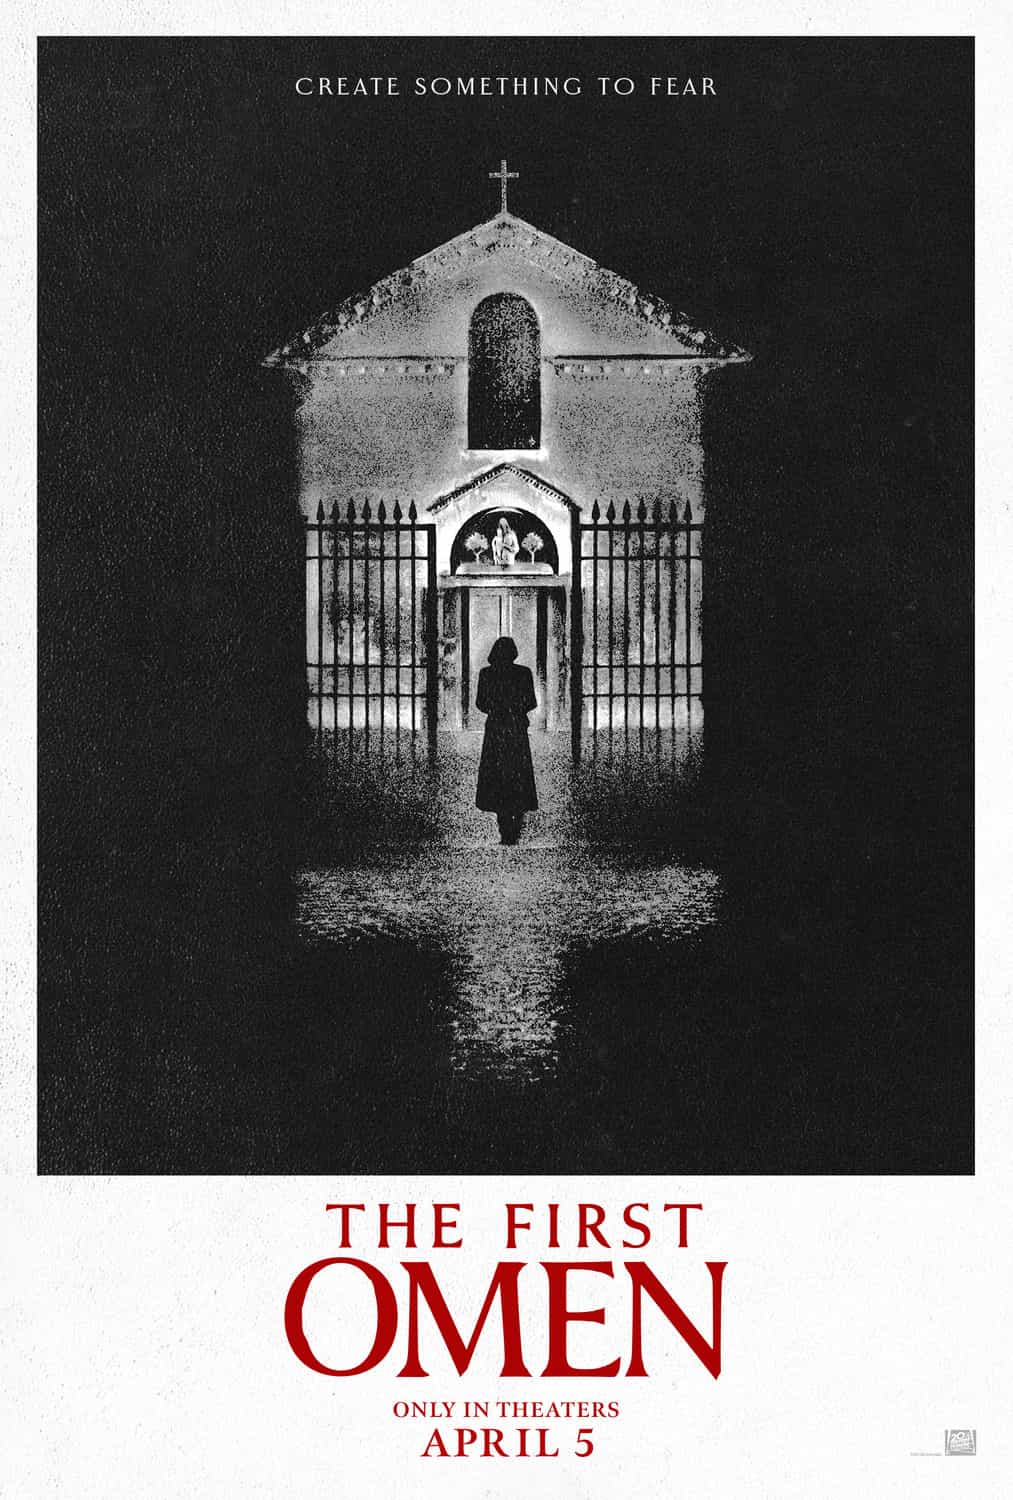 Check out the new trailer and poster for upcoming movie The First Omen which stars Bill Nighy and Ralph Ineson #thefirstomen